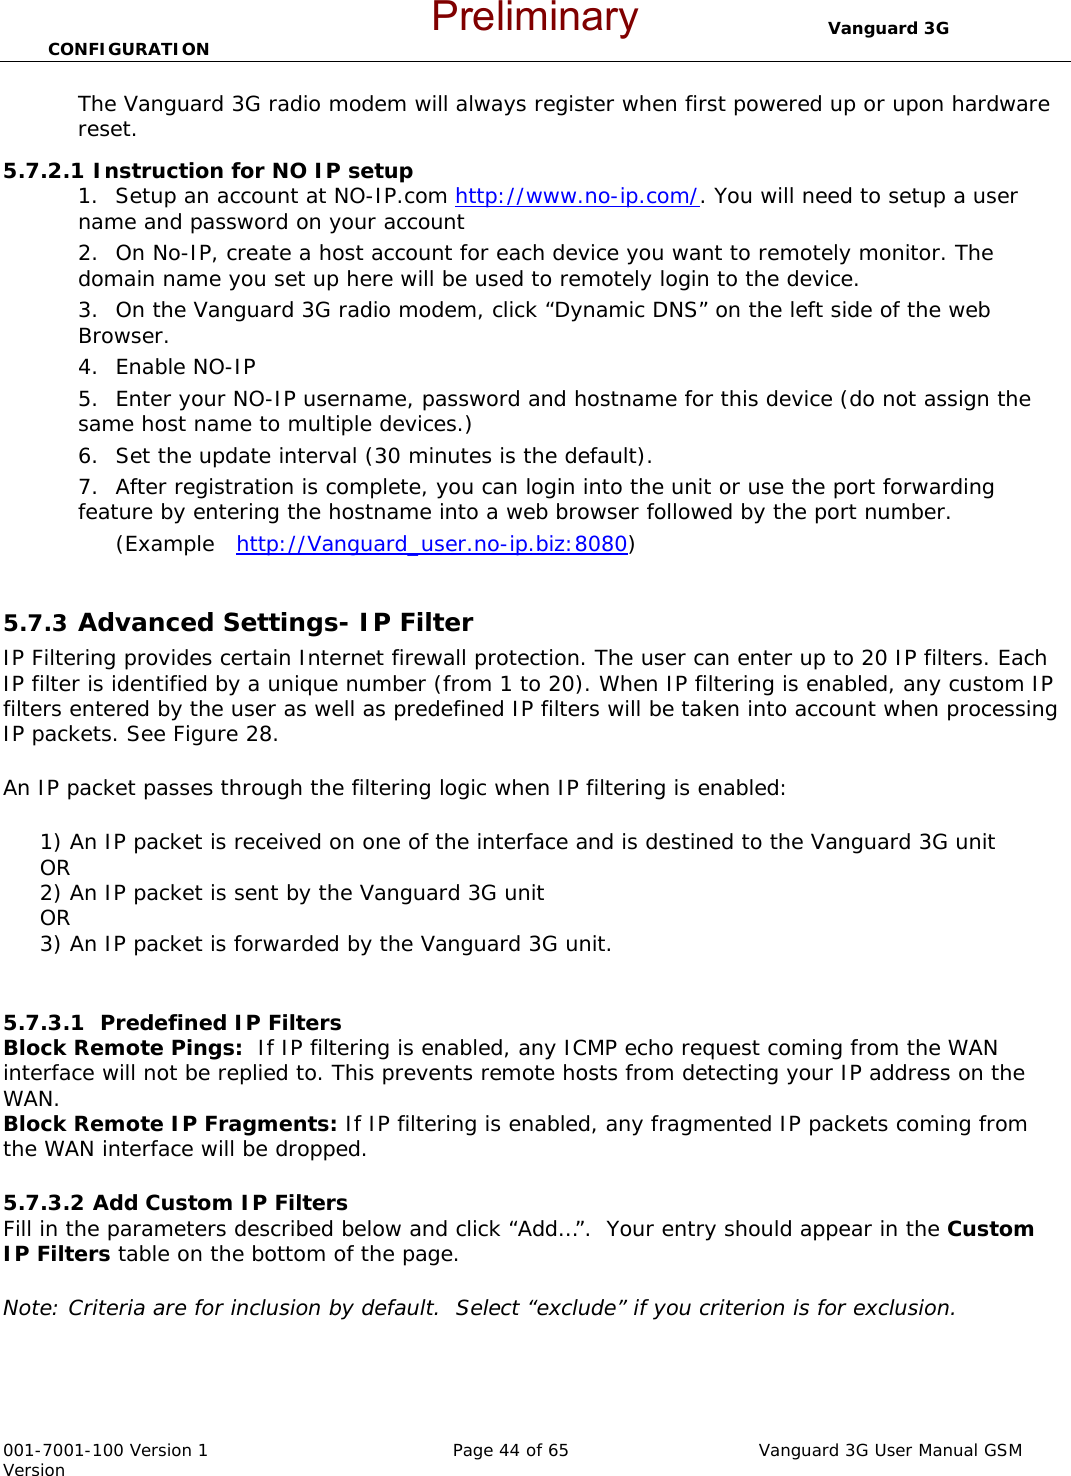                                  Vanguard 3G CONFIGURATION  001-7001-100 Version 1       Page 44 of 65       Vanguard 3G User Manual GSM Version The Vanguard 3G radio modem will always register when first powered up or upon hardware reset.      5.7.2.1 Instruction for NO IP setup 1. Setup an account at NO-IP.com http://www.no-ip.com/. You will need to setup a user name and password on your account 2. On No-IP, create a host account for each device you want to remotely monitor. The domain name you set up here will be used to remotely login to the device.   3. On the Vanguard 3G radio modem, click “Dynamic DNS” on the left side of the web Browser.   4. Enable NO-IP 5. Enter your NO-IP username, password and hostname for this device (do not assign the same host name to multiple devices.)   6. Set the update interval (30 minutes is the default).  7. After registration is complete, you can login into the unit or use the port forwarding feature by entering the hostname into a web browser followed by the port number.   (Example   http://Vanguard_user.no-ip.biz:8080)  5.7.3  Advanced Settings- IP Filter IP Filtering provides certain Internet firewall protection. The user can enter up to 20 IP filters. Each IP filter is identified by a unique number (from 1 to 20). When IP filtering is enabled, any custom IP filters entered by the user as well as predefined IP filters will be taken into account when processing IP packets. See Figure 28.  An IP packet passes through the filtering logic when IP filtering is enabled:       1) An IP packet is received on one of the interface and is destined to the Vanguard 3G unit      OR      2) An IP packet is sent by the Vanguard 3G unit      OR      3) An IP packet is forwarded by the Vanguard 3G unit.  5.7.3.1  Predefined IP Filters  Block Remote Pings:  If IP filtering is enabled, any ICMP echo request coming from the WAN interface will not be replied to. This prevents remote hosts from detecting your IP address on the WAN. Block Remote IP Fragments: If IP filtering is enabled, any fragmented IP packets coming from the WAN interface will be dropped.  5.7.3.2 Add Custom IP Filters  Fill in the parameters described below and click “Add…”.  Your entry should appear in the Custom IP Filters table on the bottom of the page.  Note: Criteria are for inclusion by default.  Select “exclude” if you criterion is for exclusion.     Preliminary